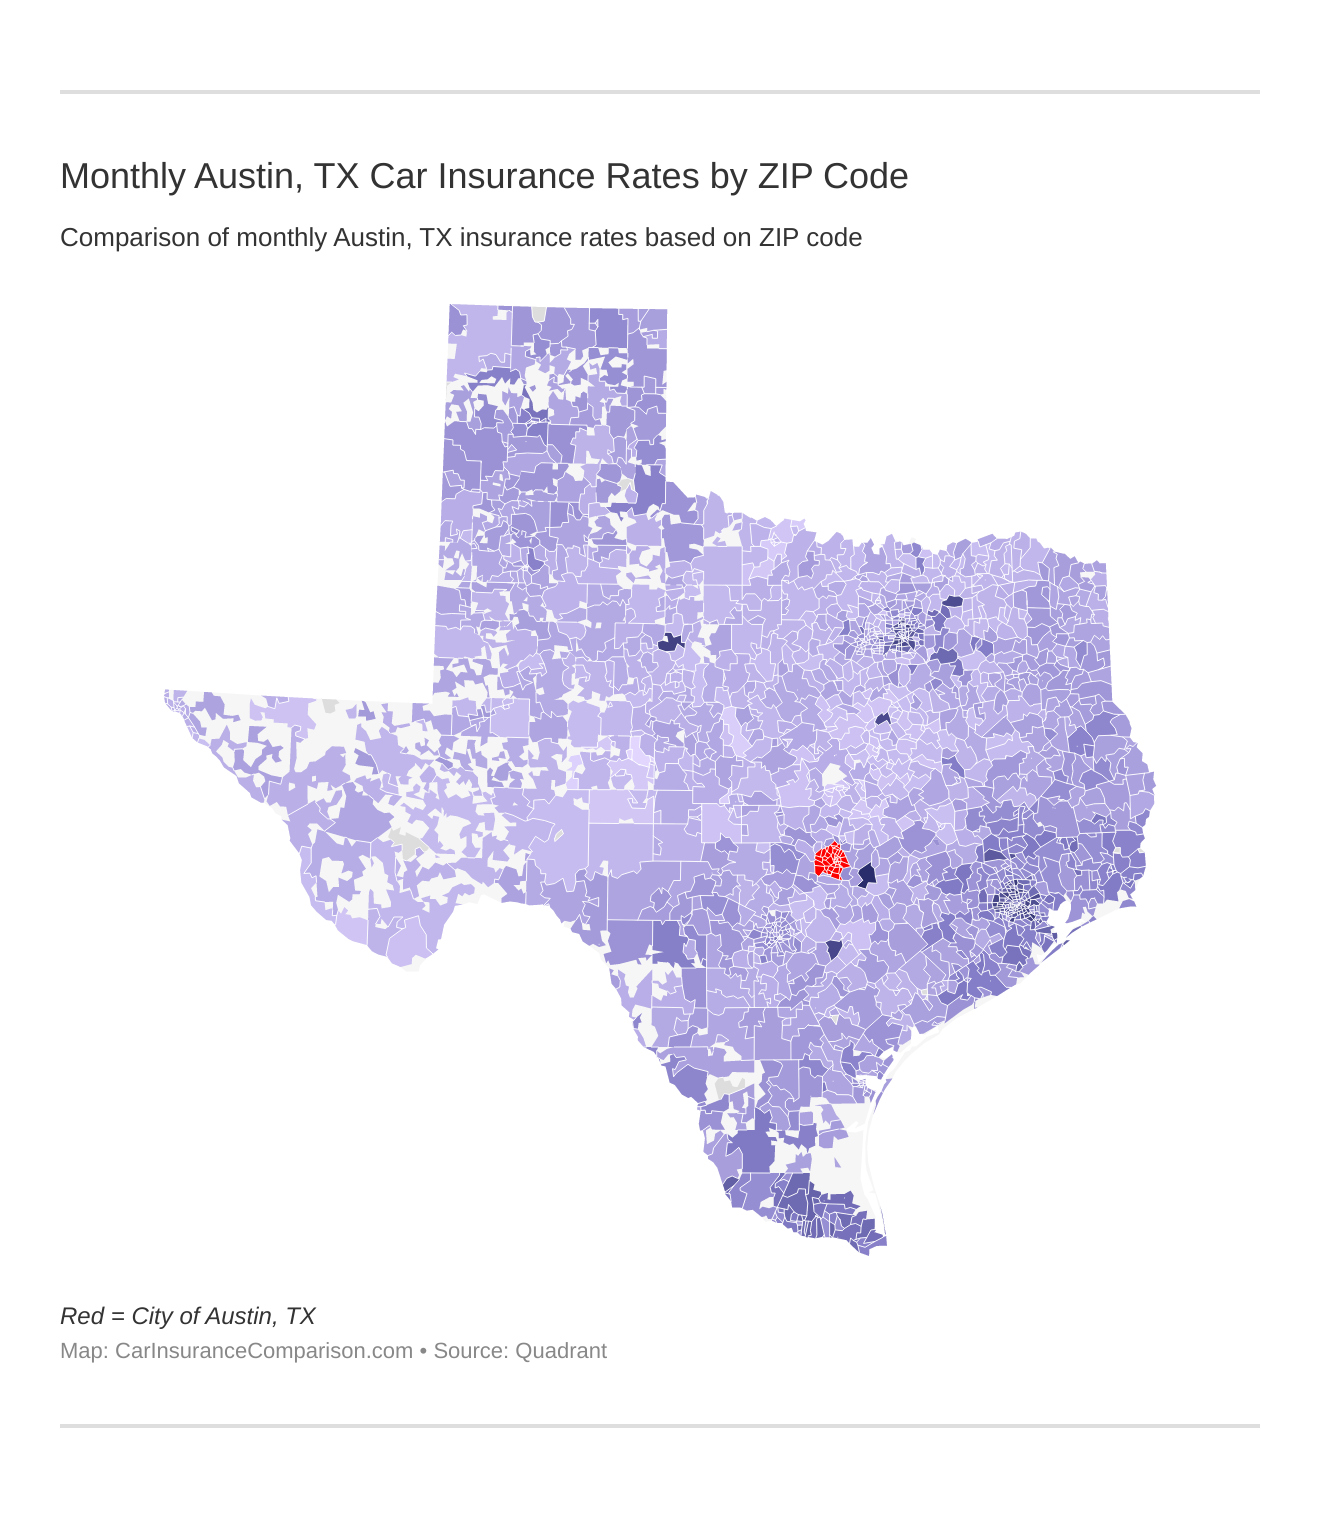 Monthly Austin, TX Car Insurance Rates by ZIP Code